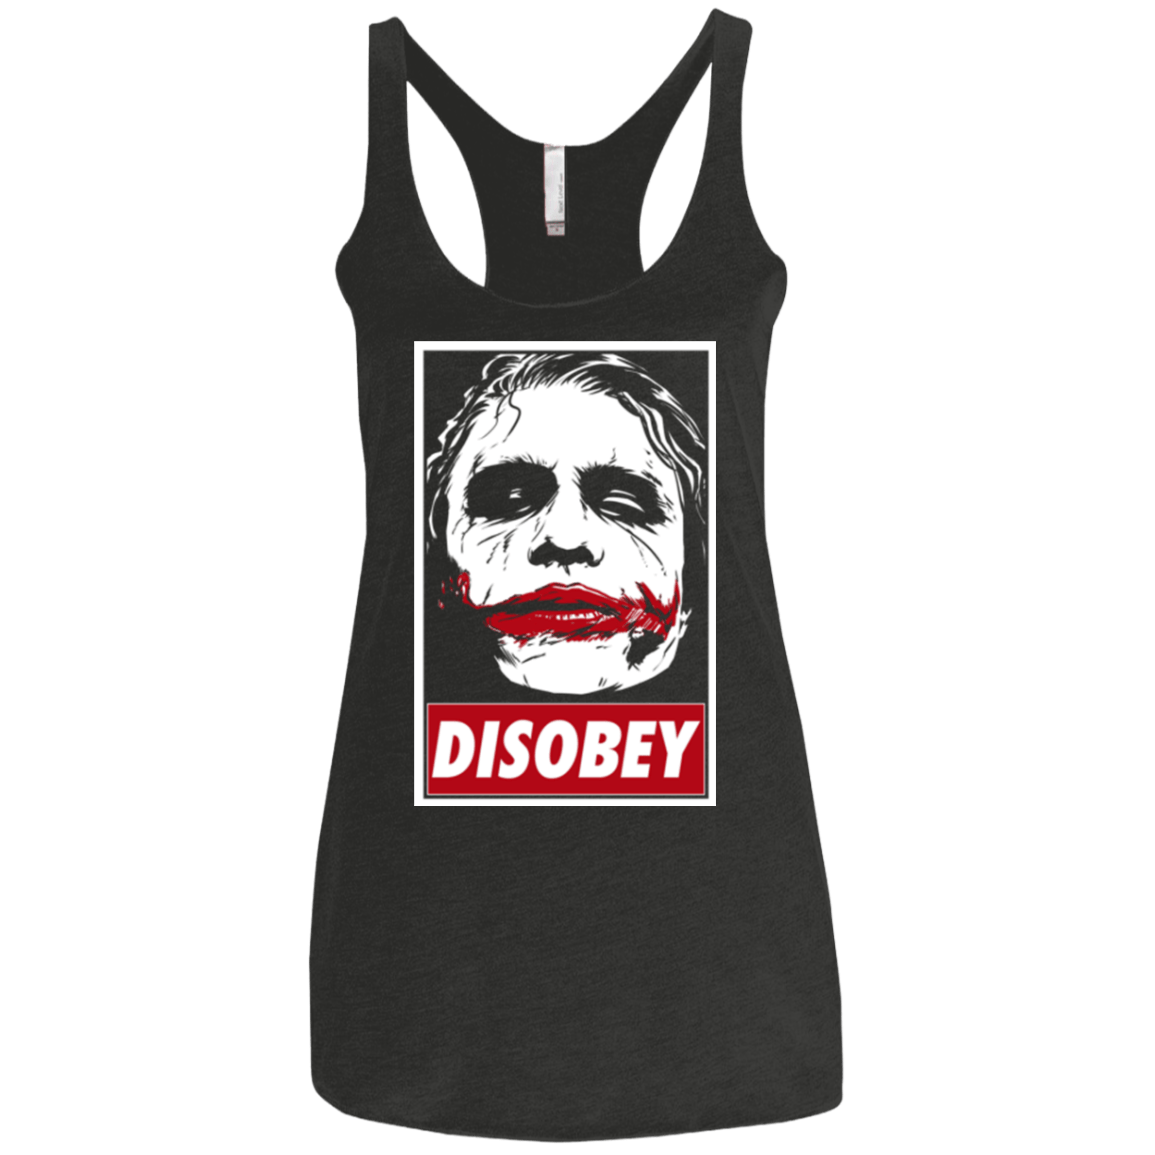 T-Shirts Vintage Black / X-Small Chaos and Disobey Women's Triblend Racerback Tank